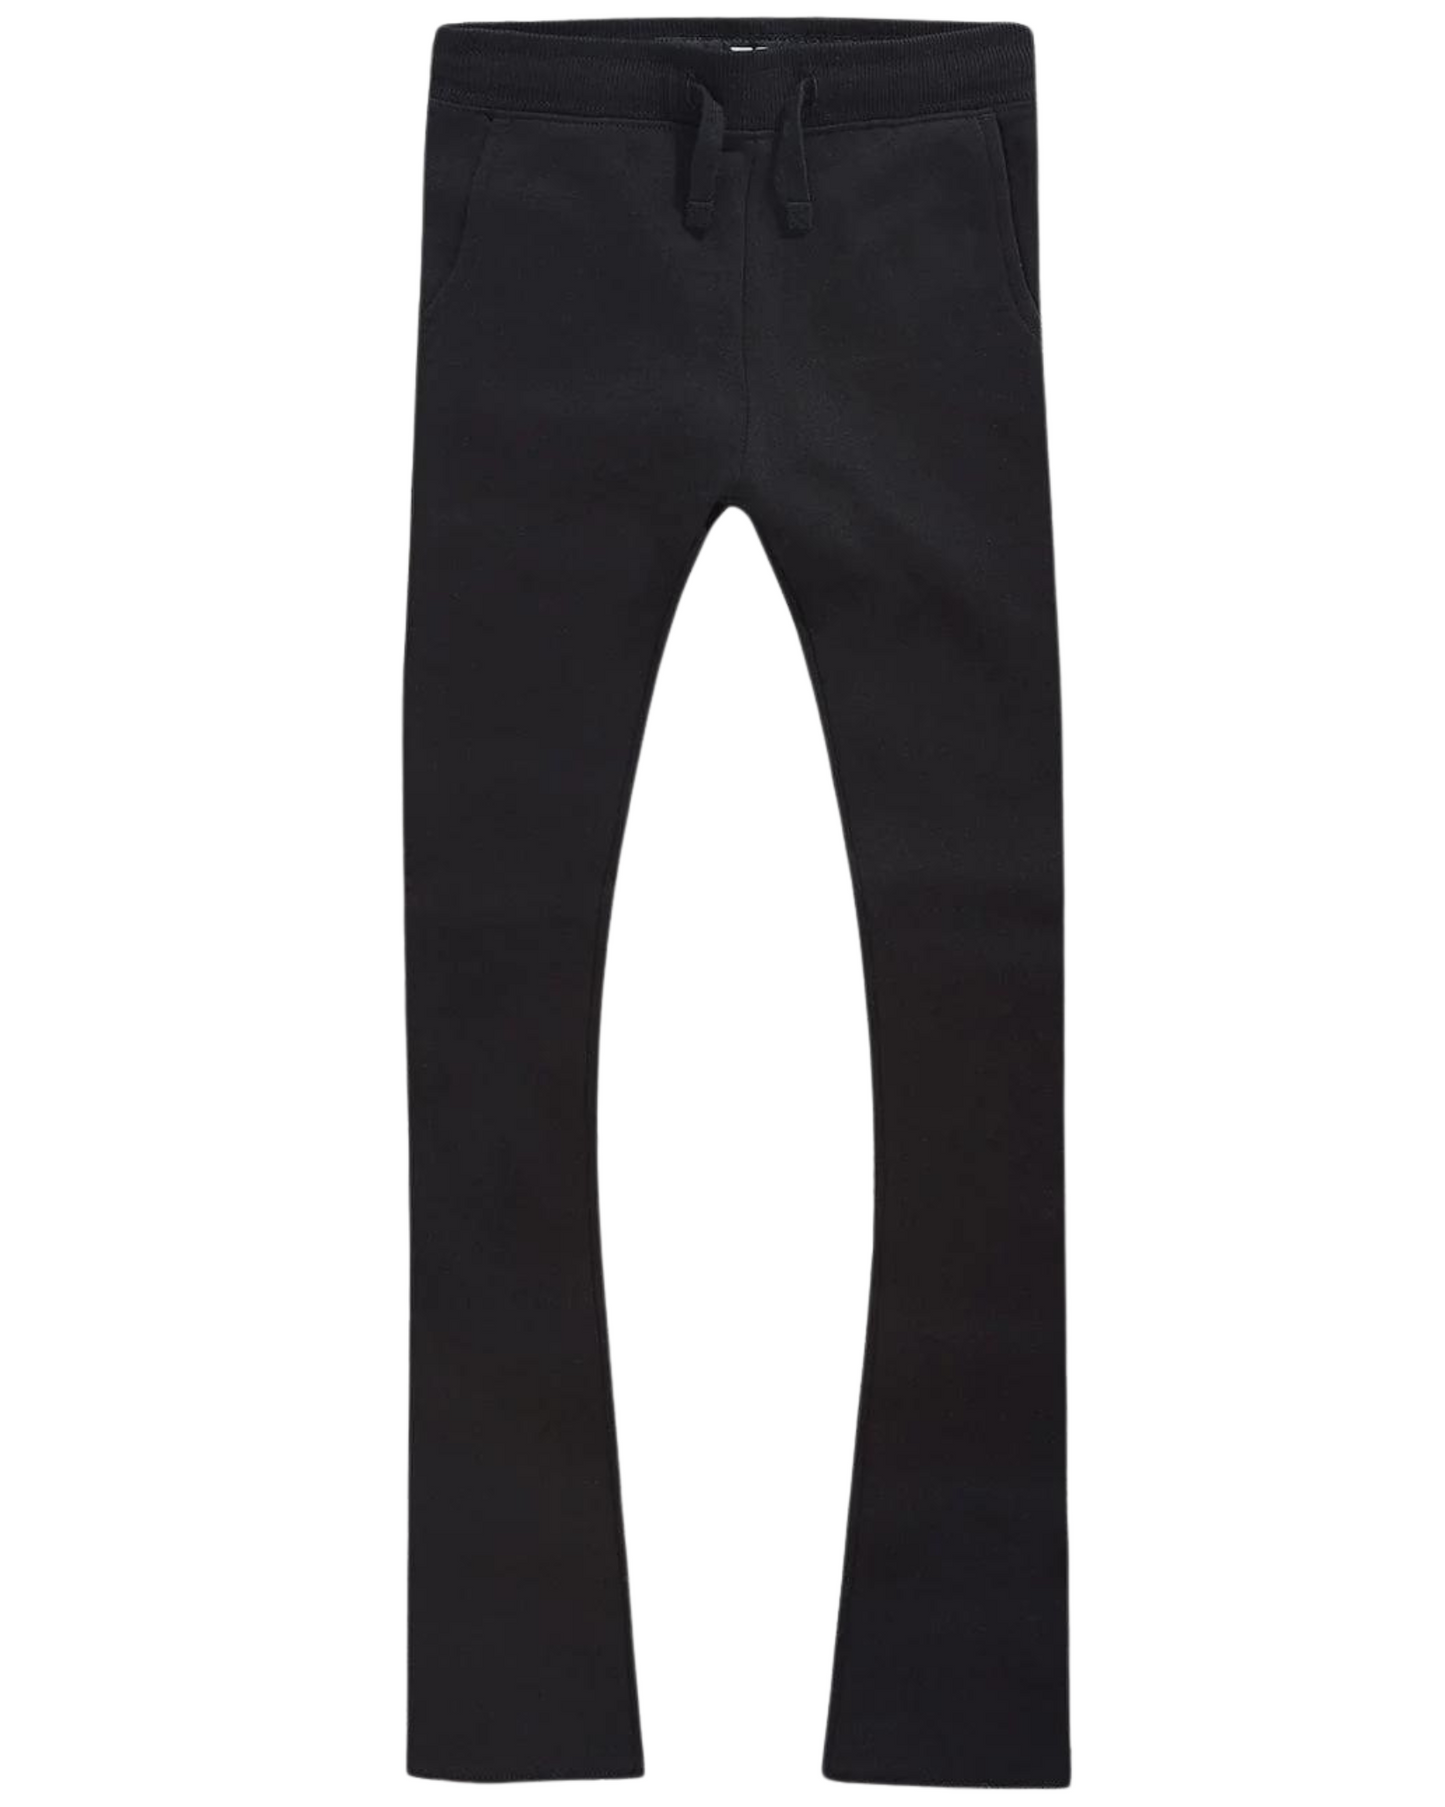 Kids Uptown Stacked Sweatpants 8821